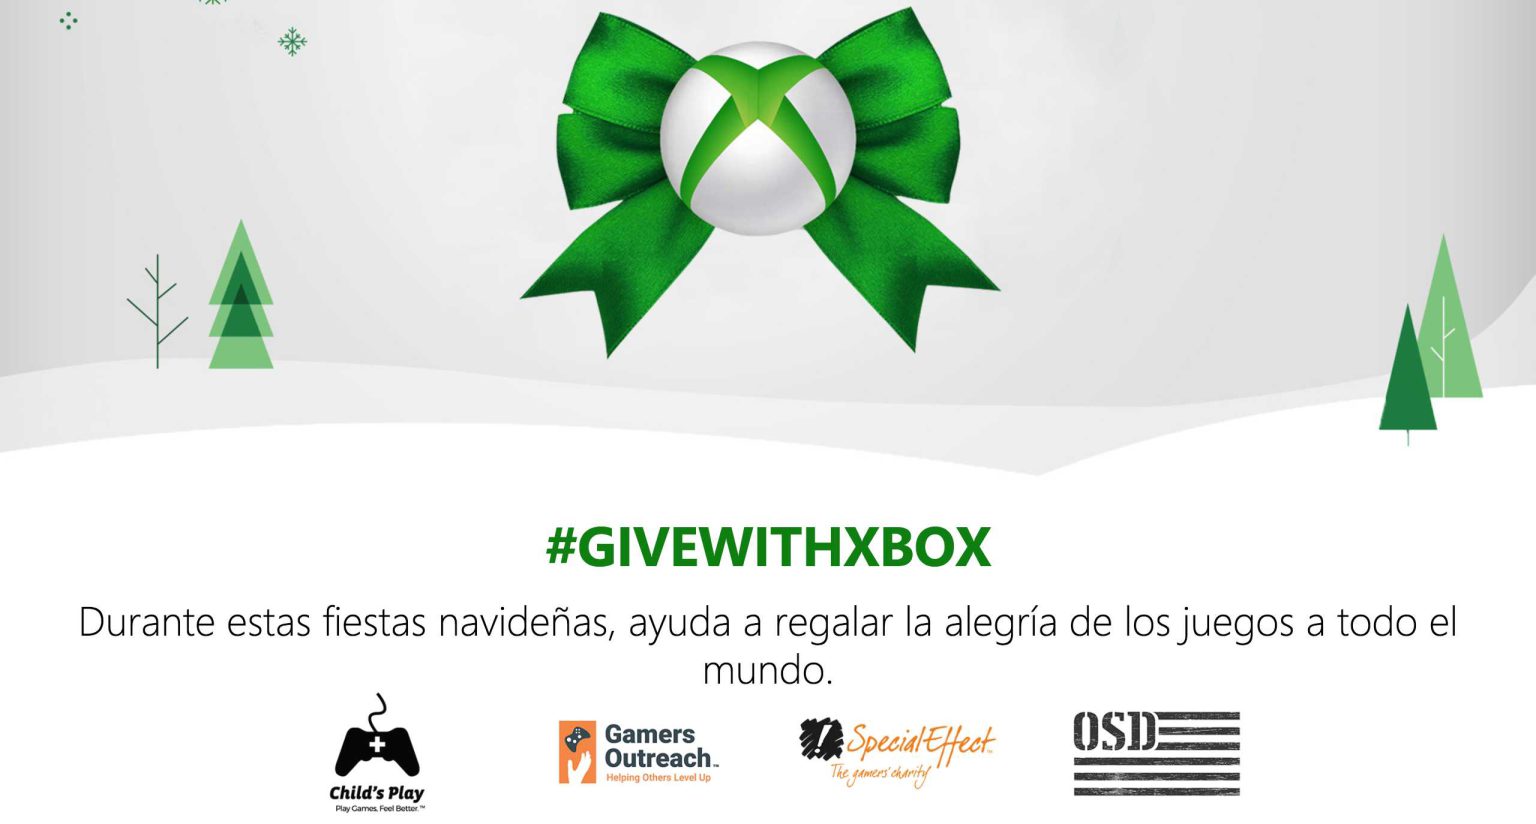 GiveWithXbox